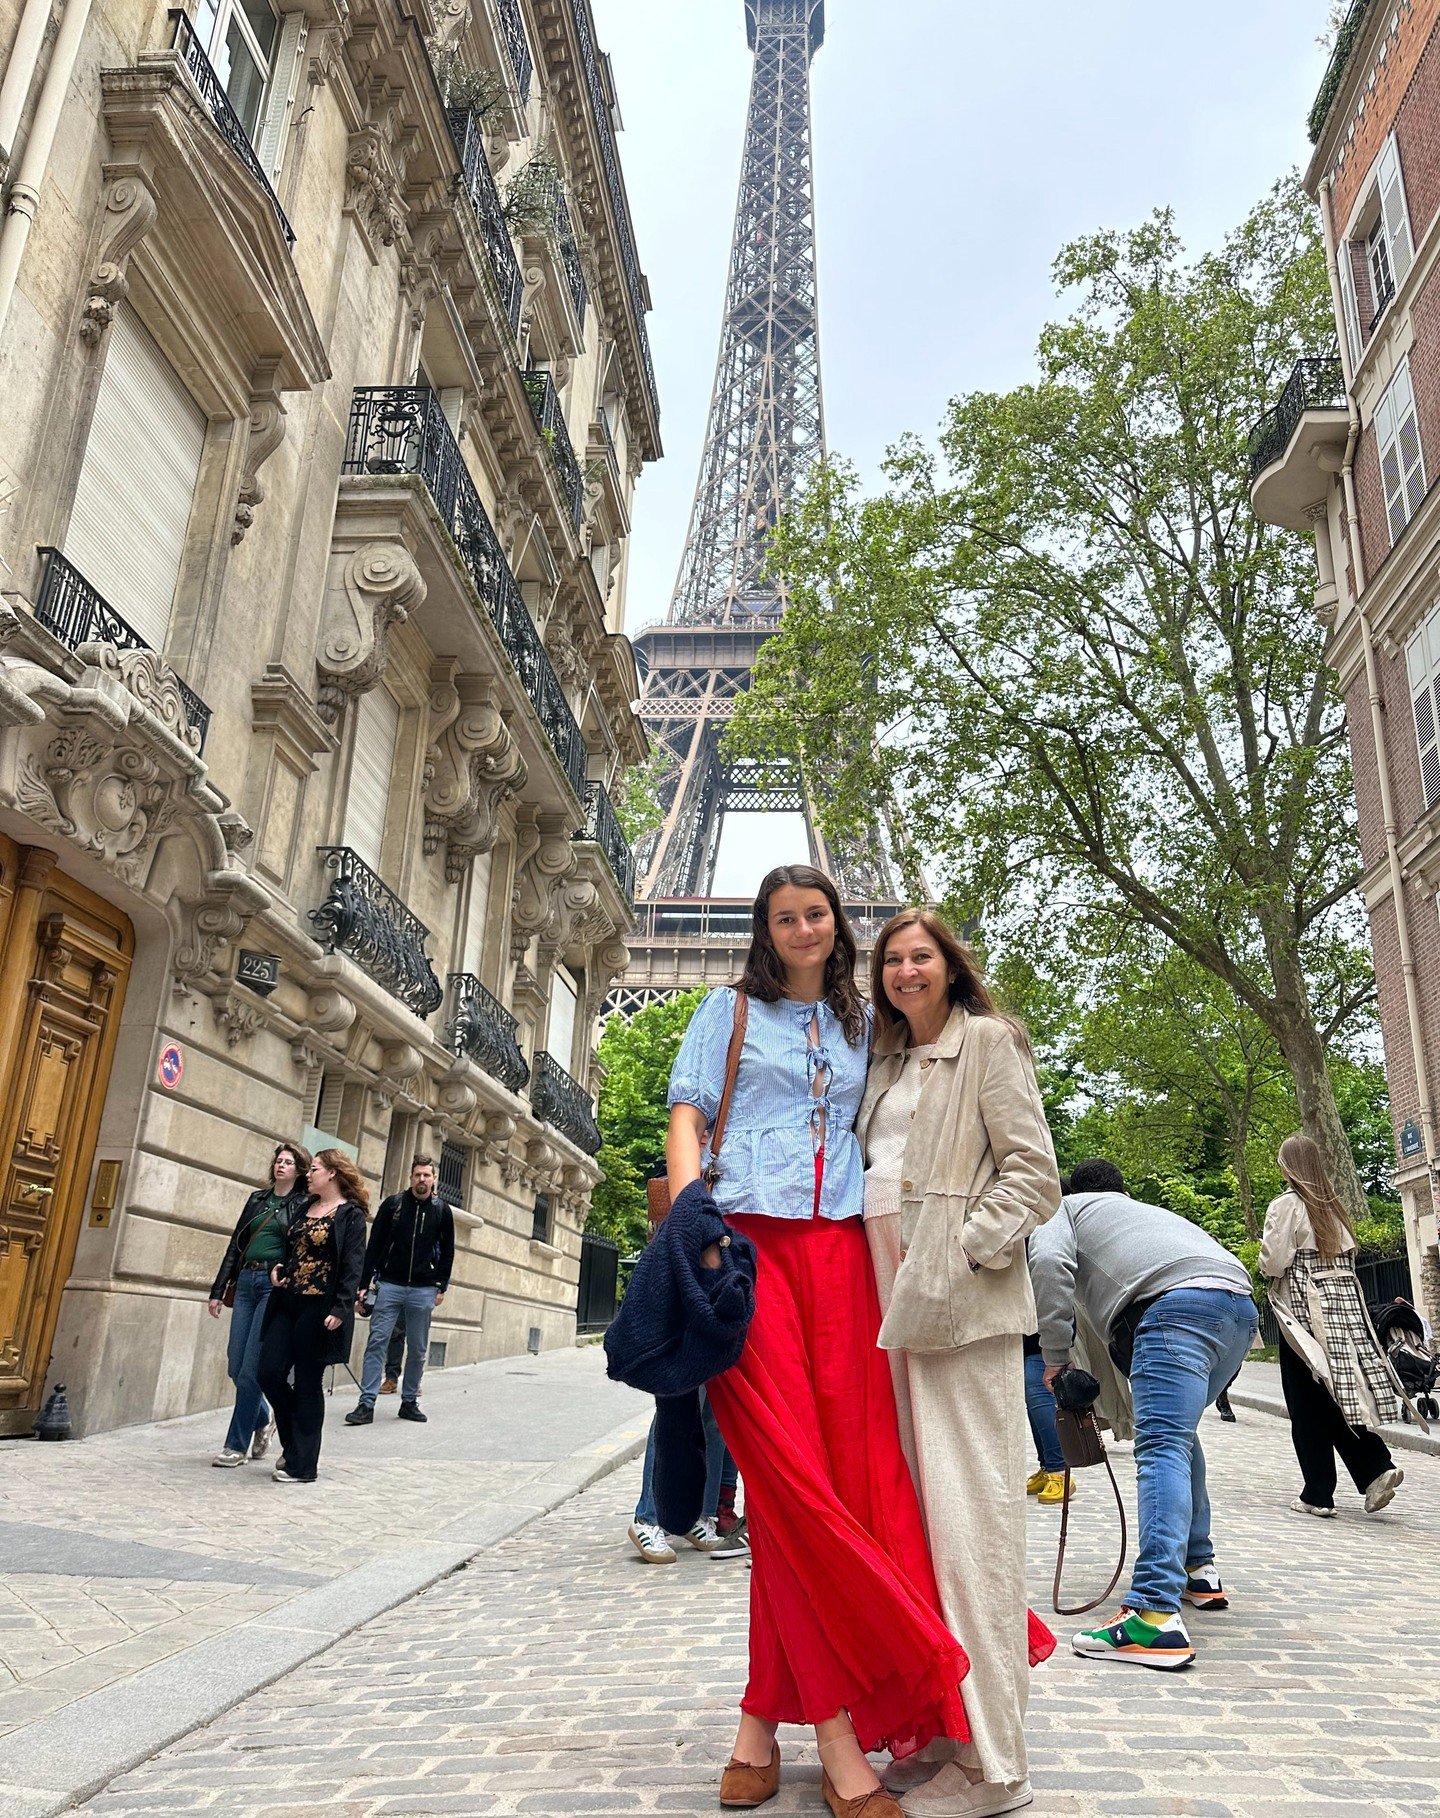 Even we can&rsquo;t resist a trip to Paris once in a while! ✨💖👯&zwj;♀️

Eleni, one of our team members, is enjoying the fun experiences our clients have been raving about! 🇫🇷🌻 

https://tournesoltravel.com/

#tourismefrance #francetourisme #visi